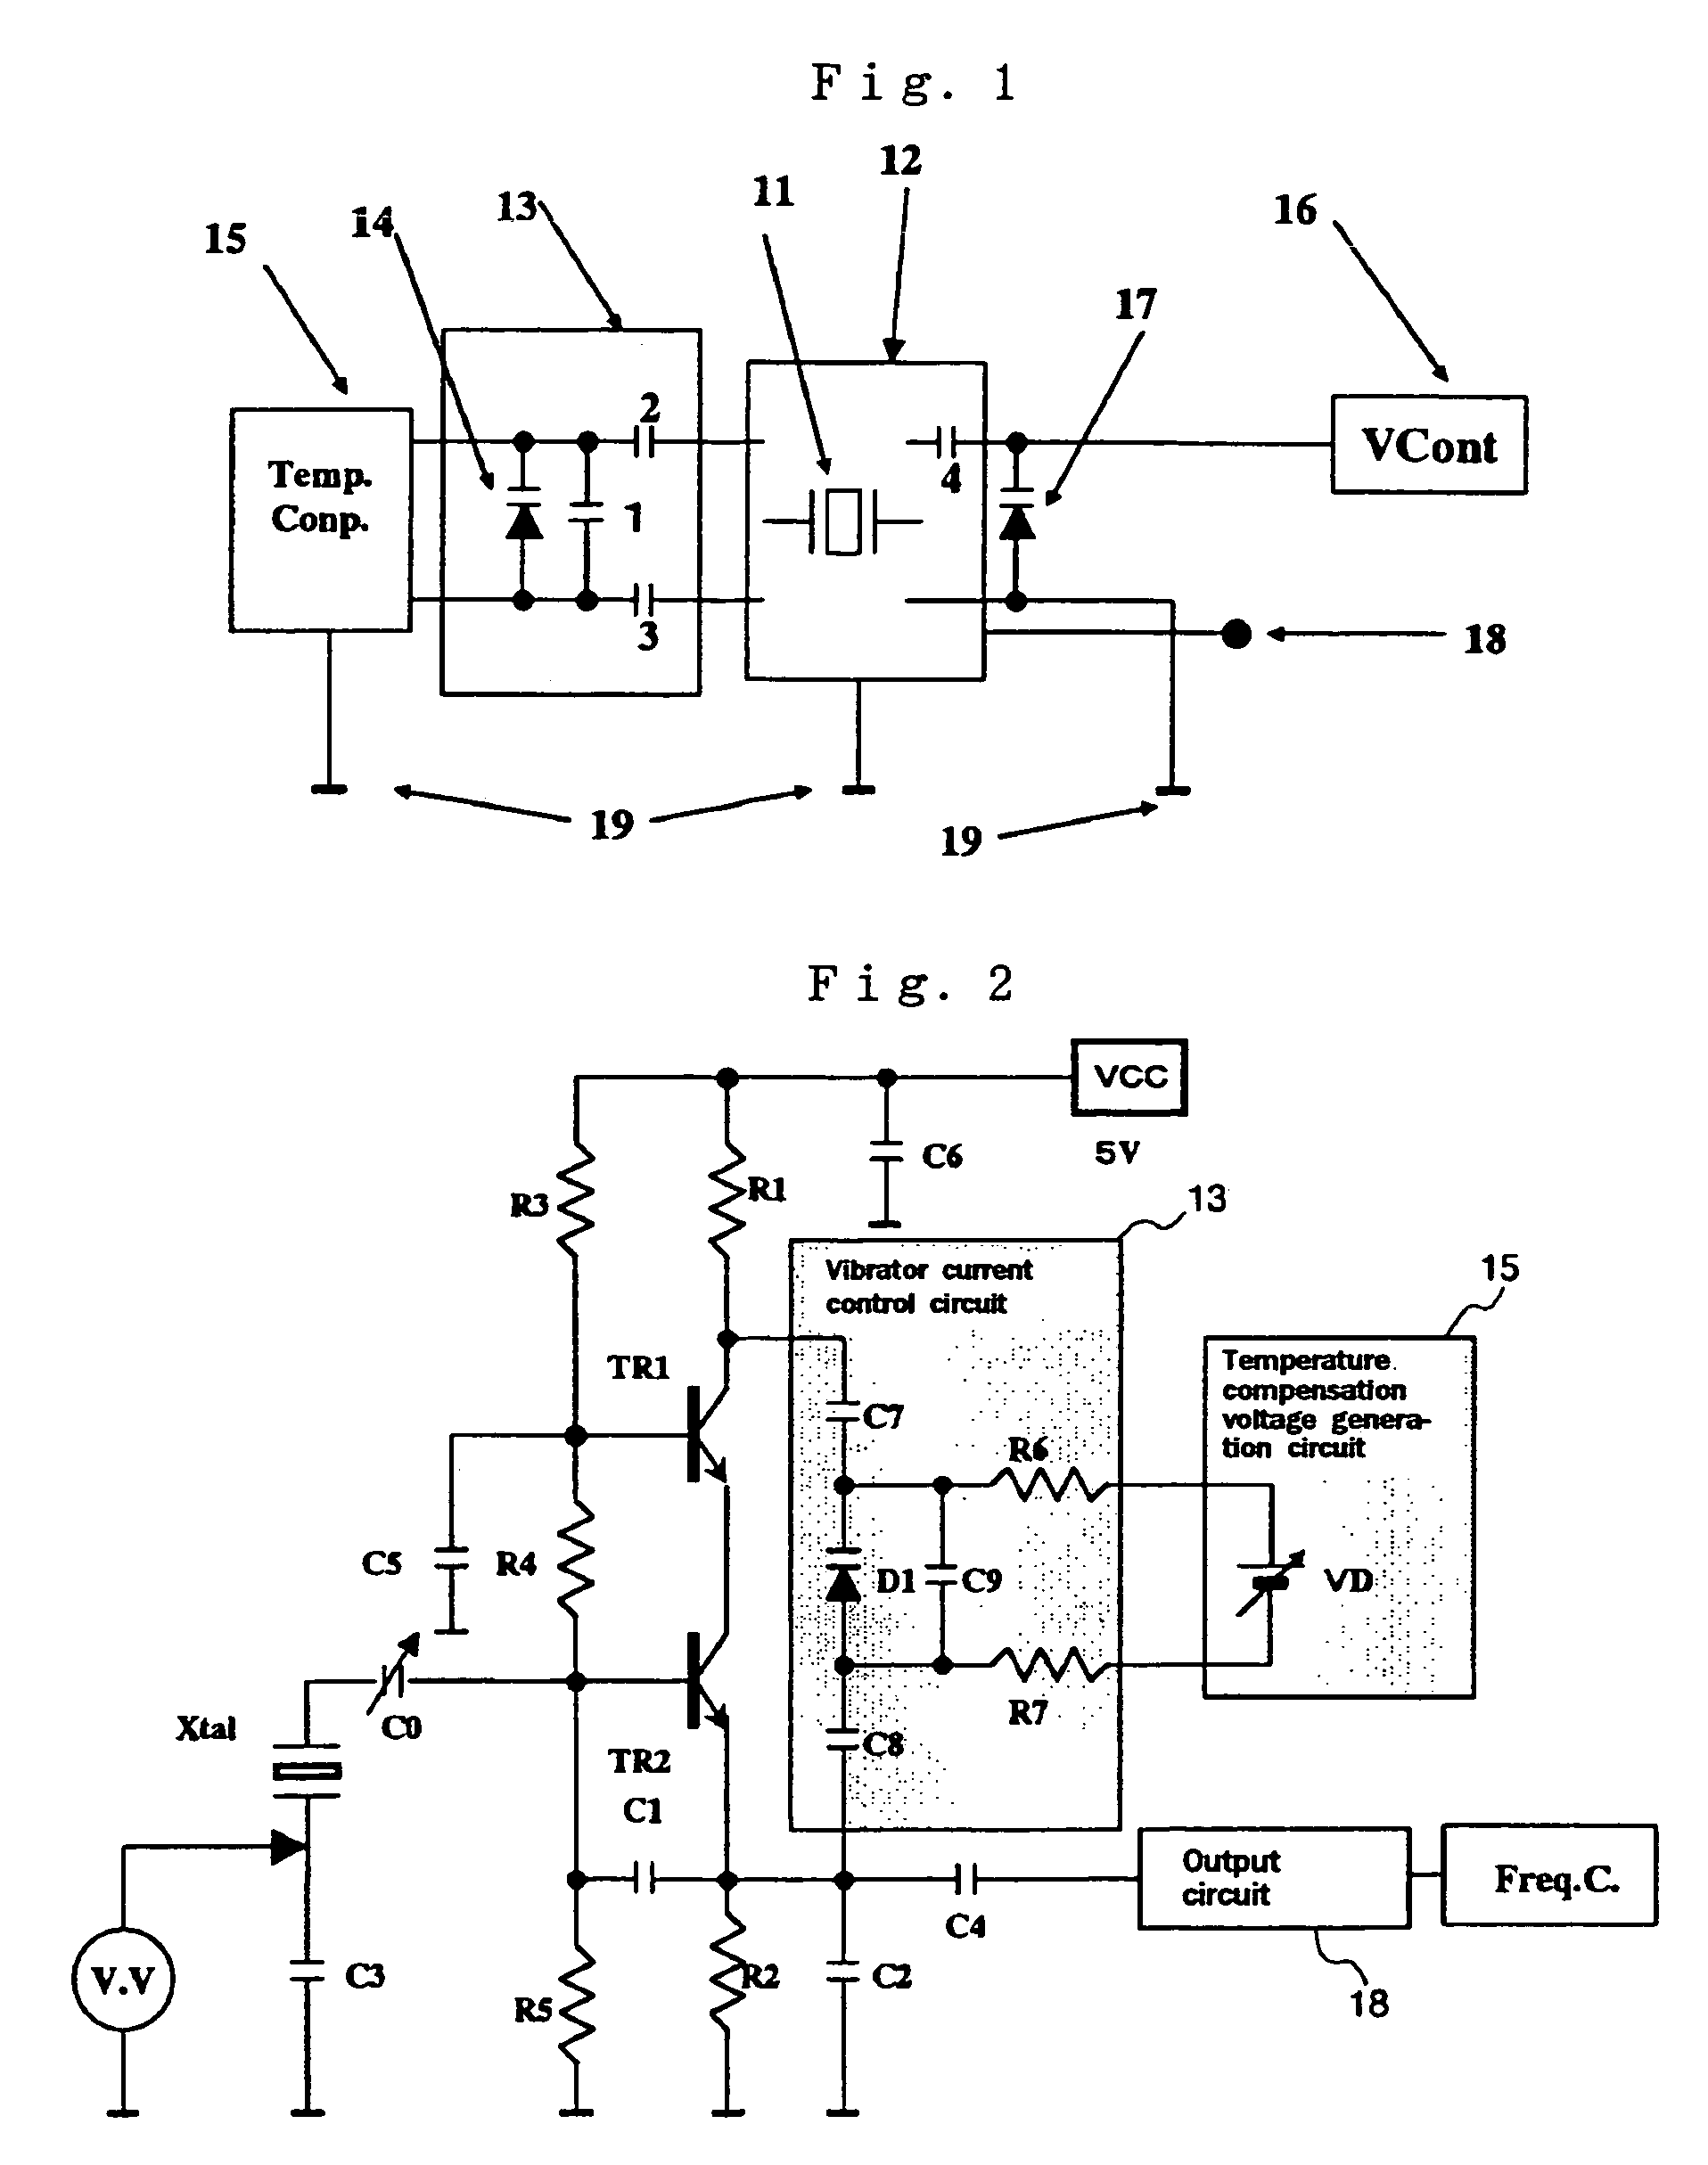 Crystal oscillator with temperature compensated through a vibrator current control circuit